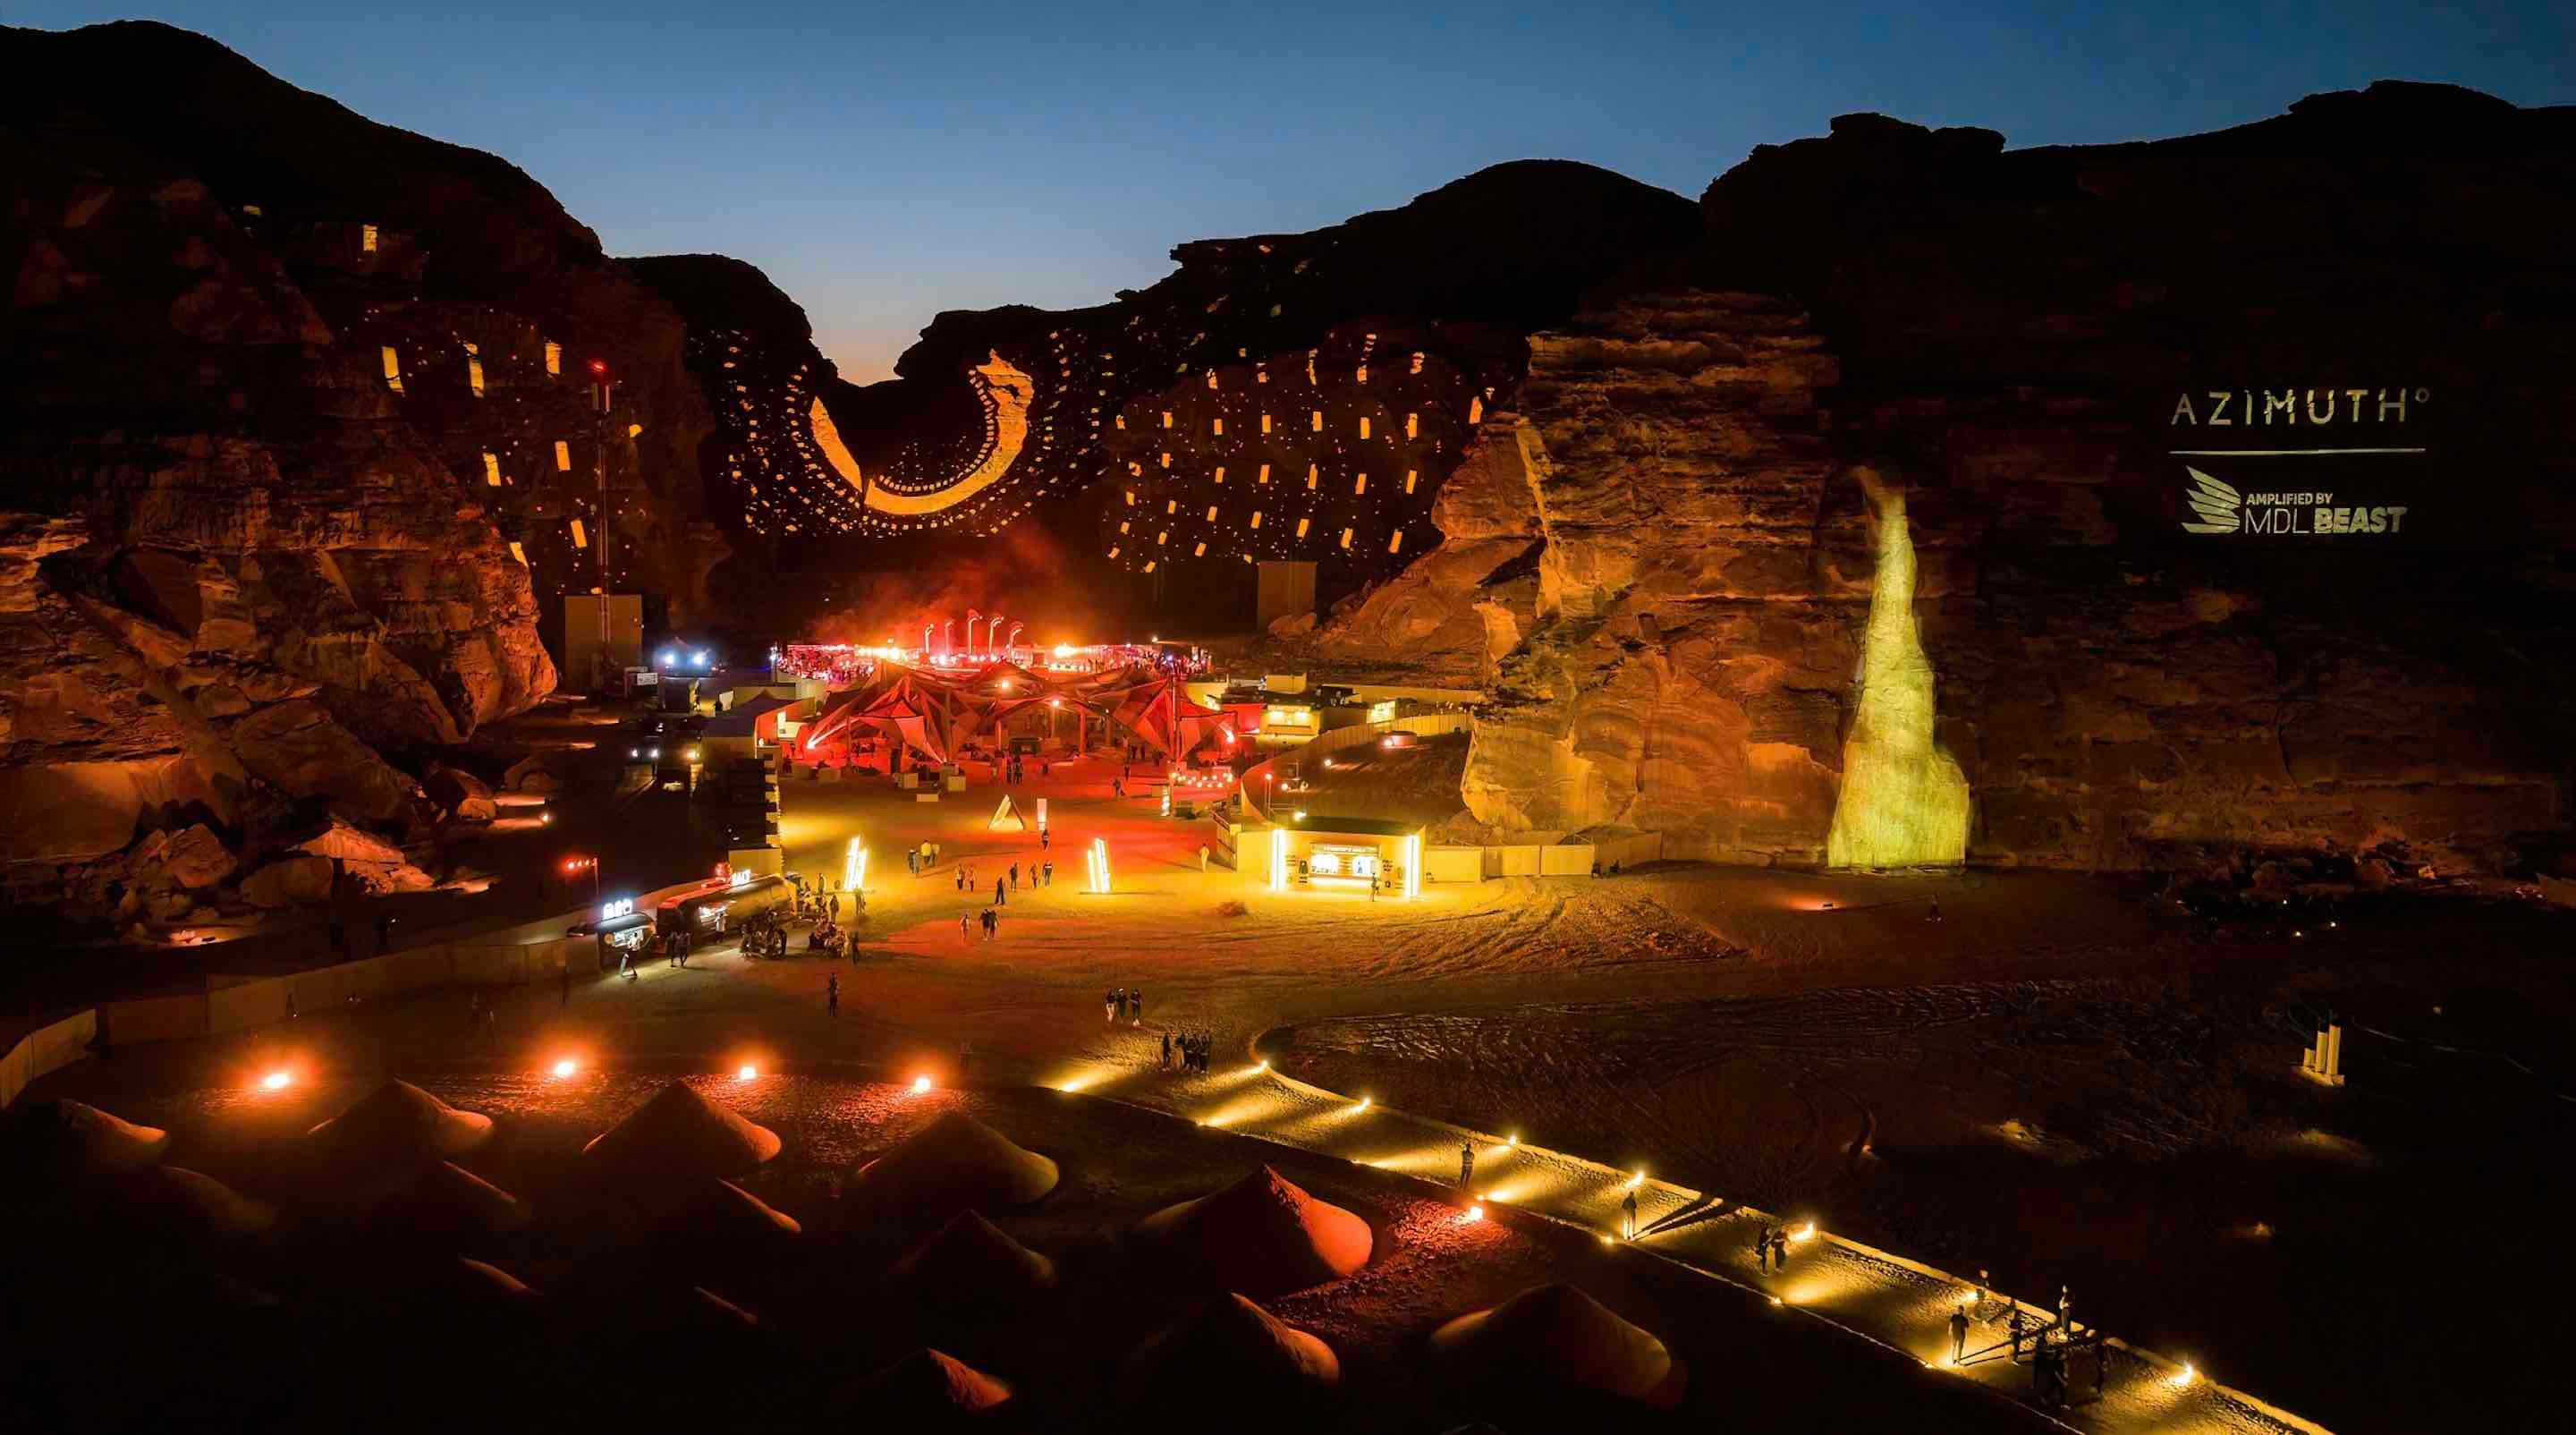 AZIMUTH is set to return to AlUla this September